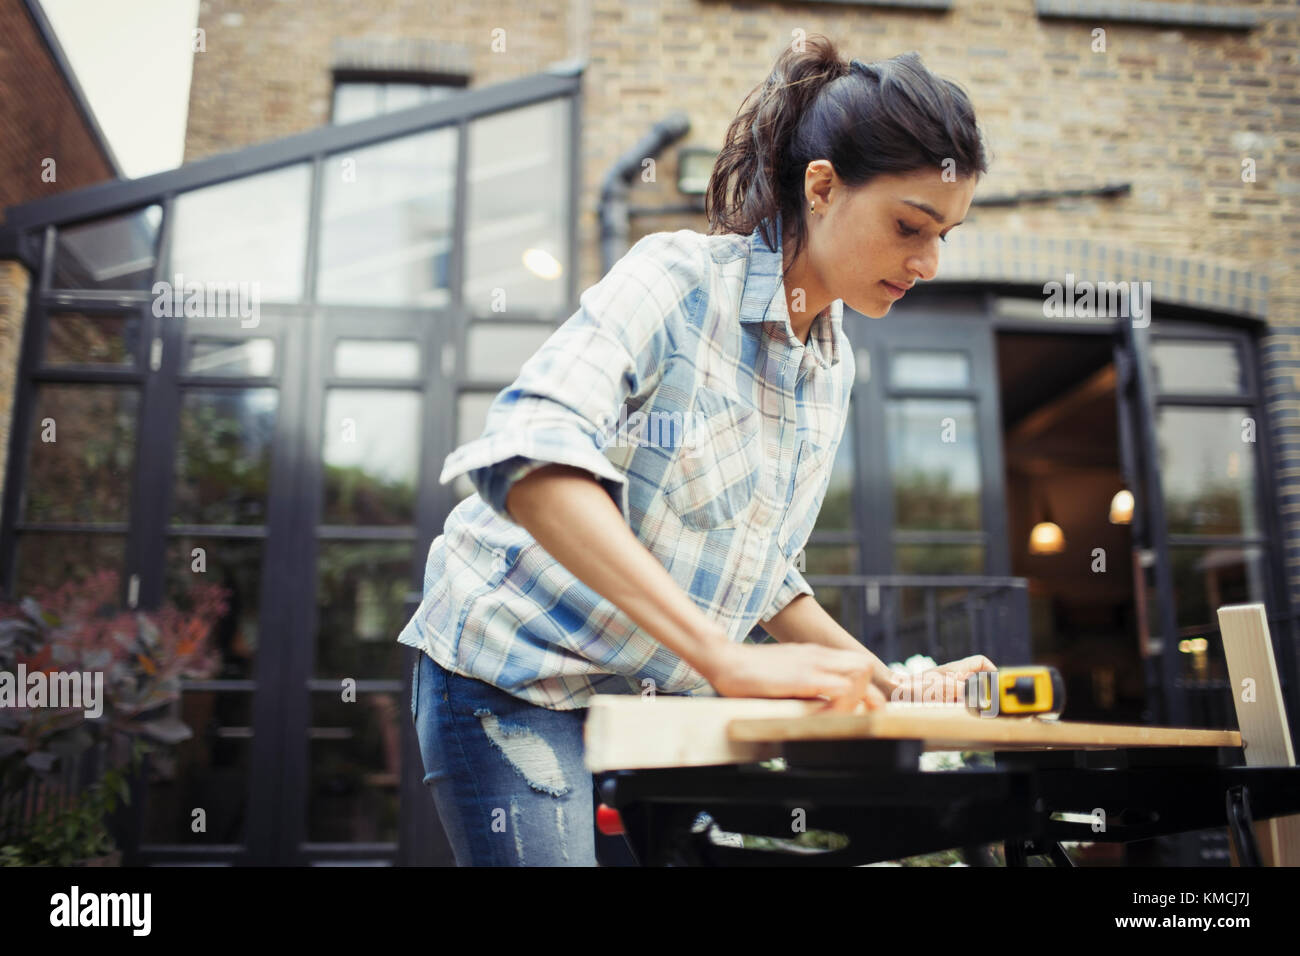 Young woman measuring wood on patio Stock Photo